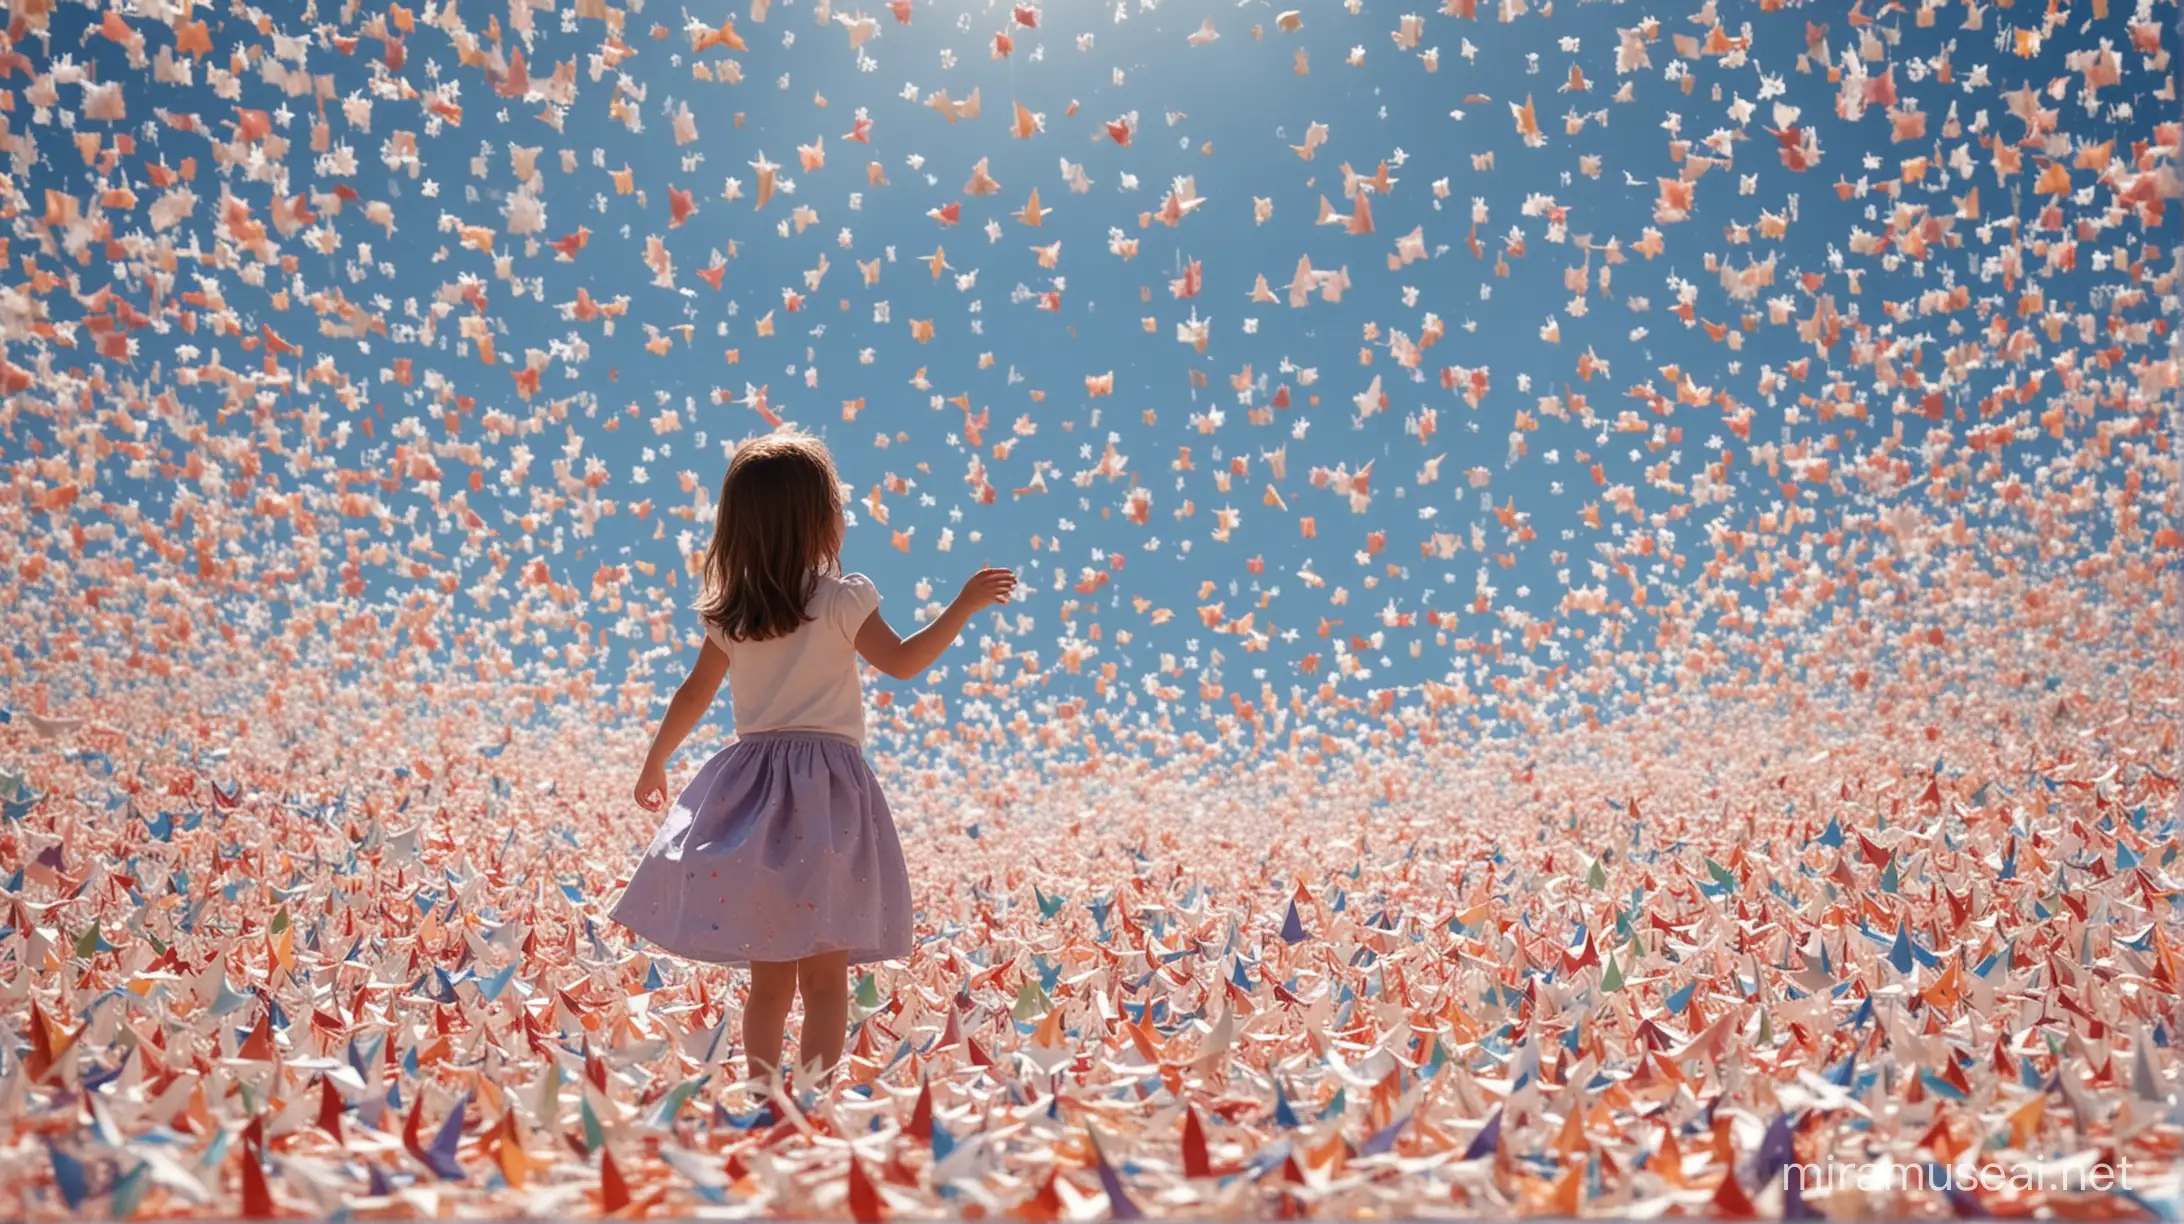 Adventurous Journey Little Girl Riding Thousand Paper Cranes in the Sky